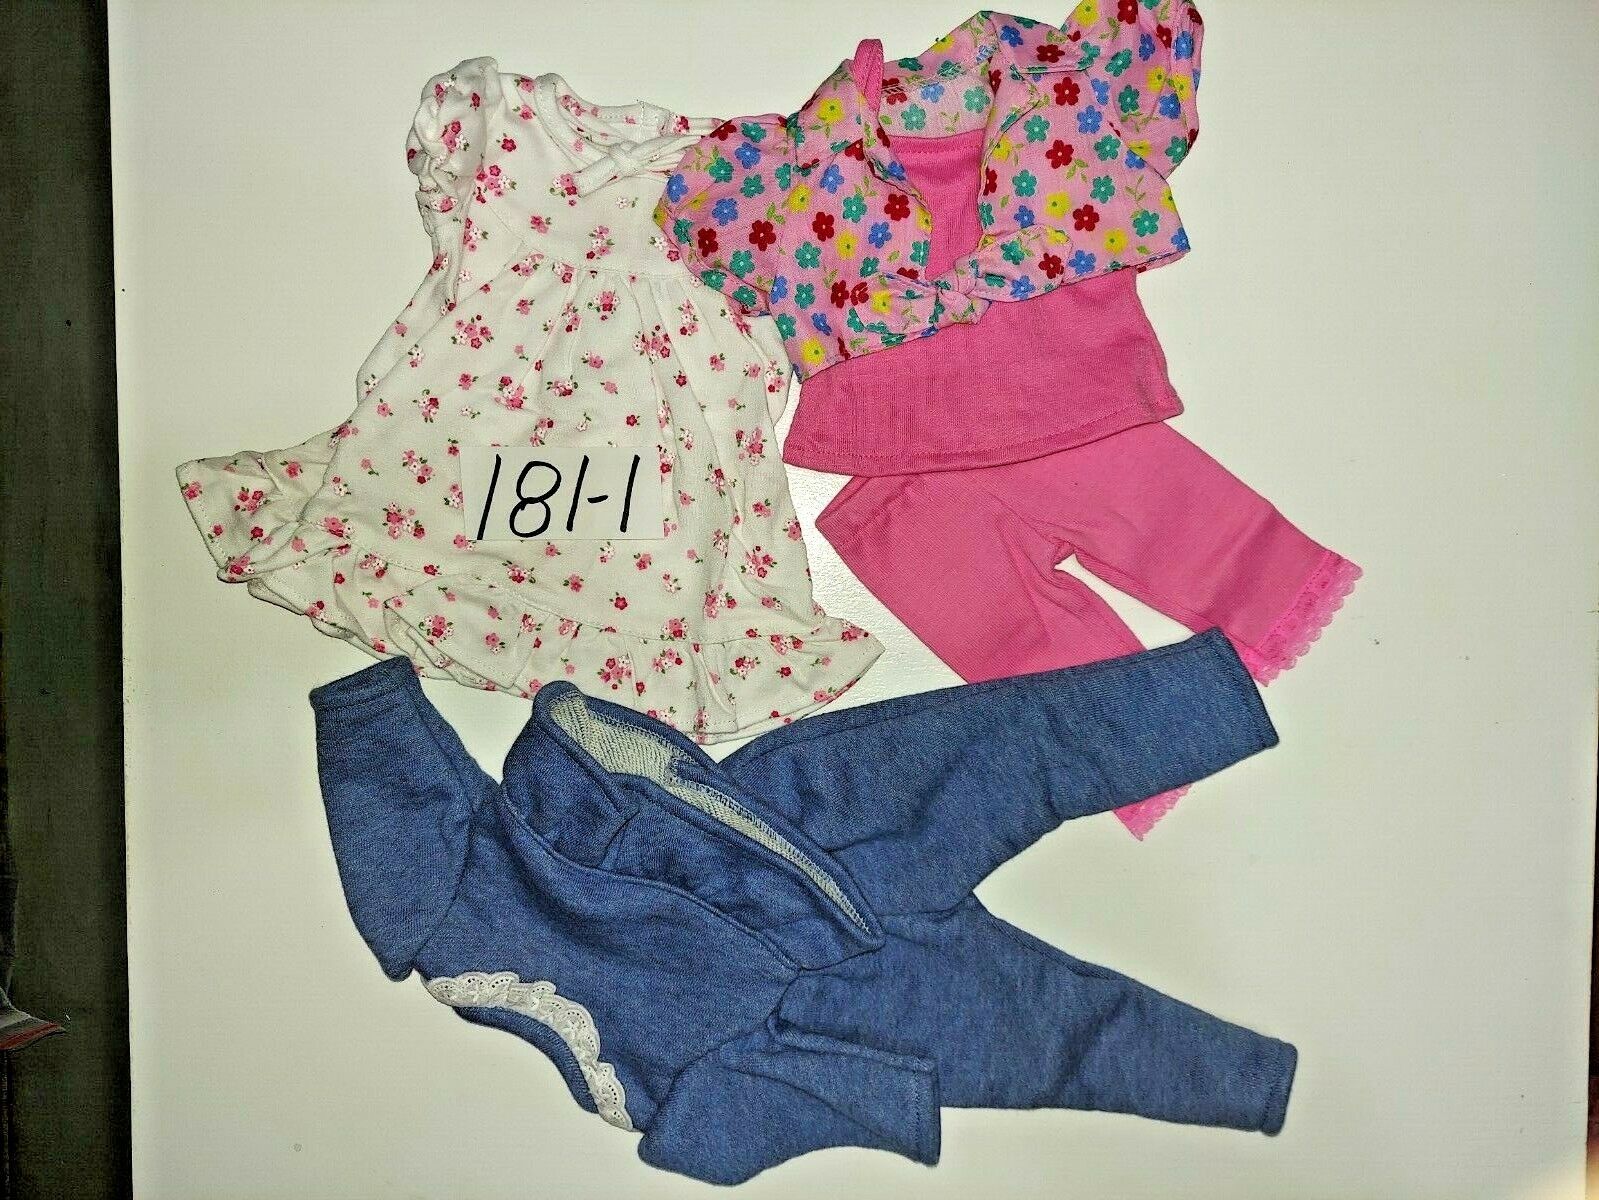 Doll Clothes # 181-1 fits 18inch American Girl Lot american doll clothing does not apply